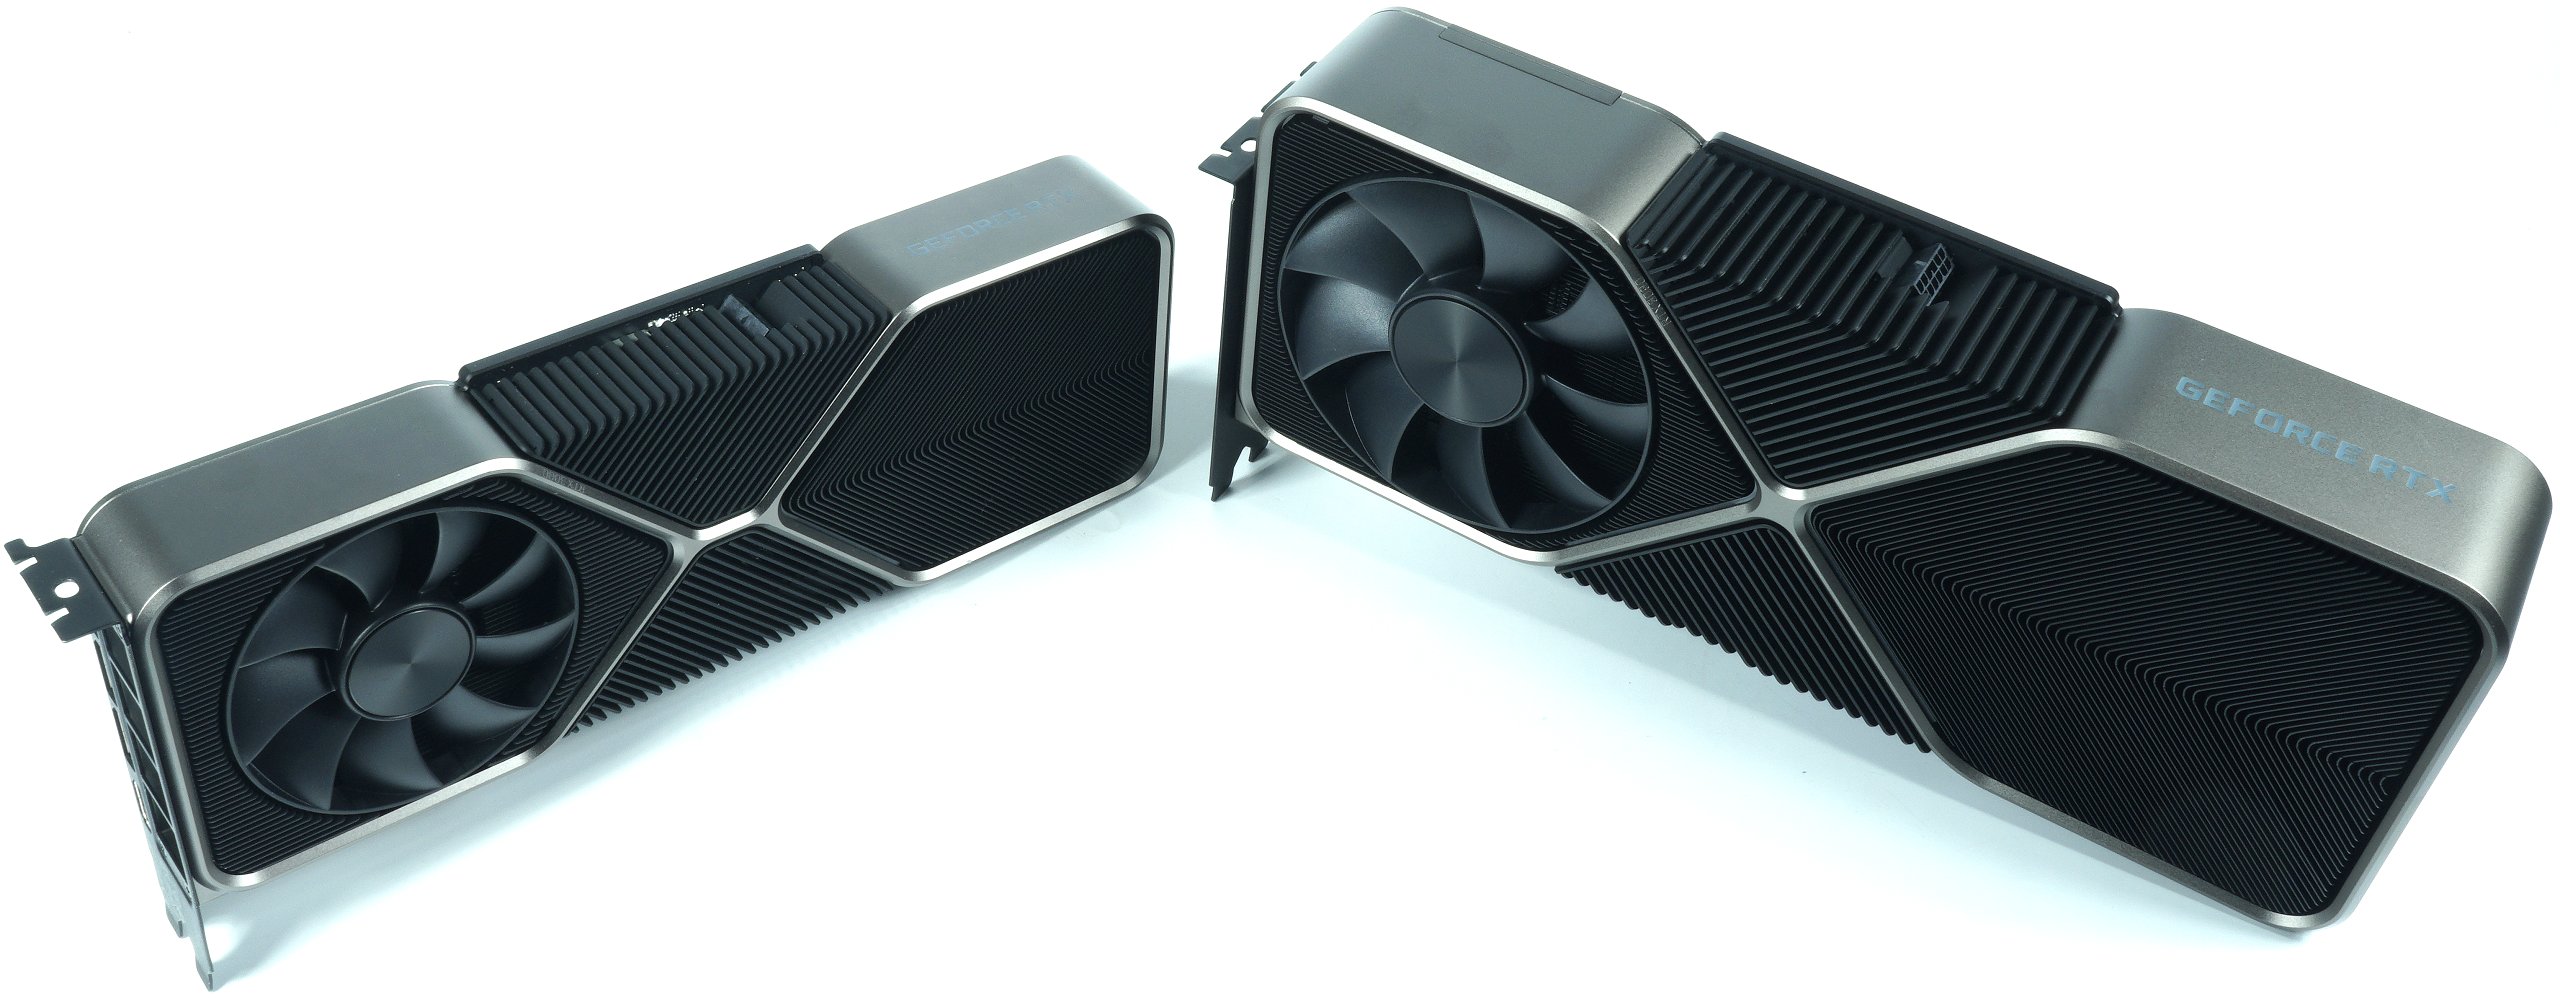 NVIDIA GeForce RTX 3090 Founders Edition Review: Between Value and